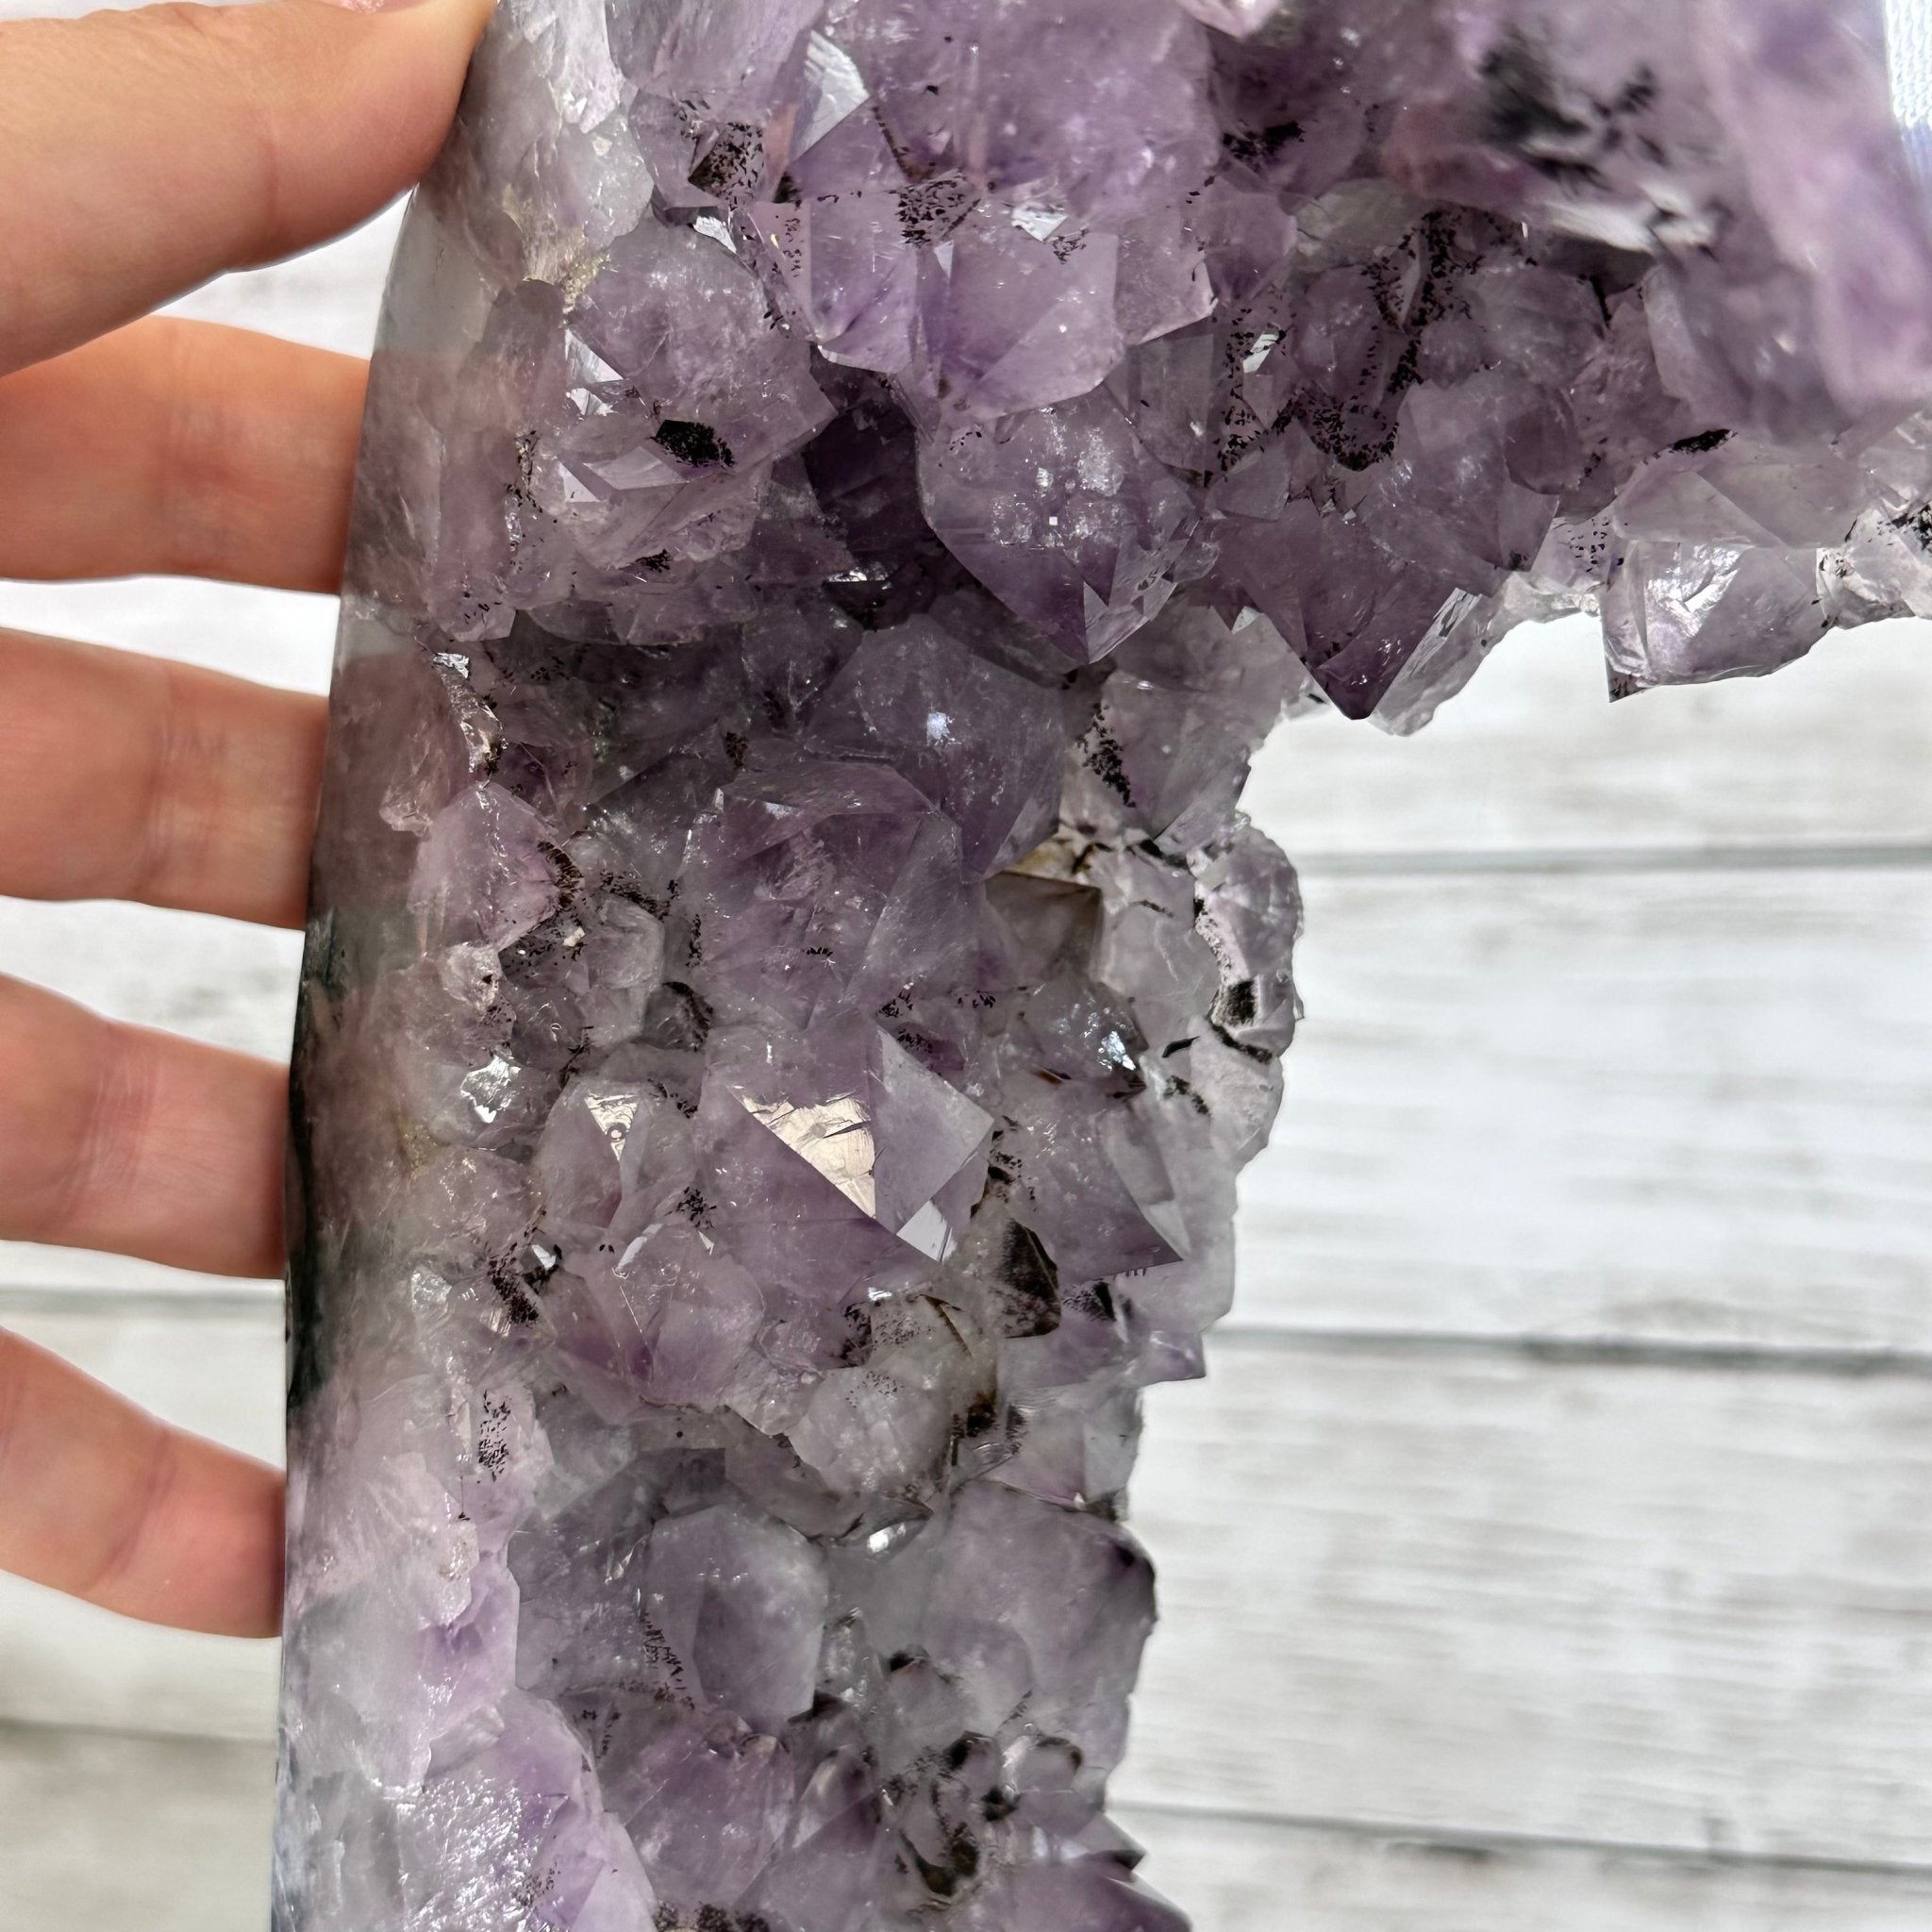 Standard Plus Quality Open 2-Sided Brazilian Amethyst Cathedral, 25.7 lbs, 17.25" tall, Model #5605-0130 by Brazil Gems - Brazil GemsBrazil GemsStandard Plus Quality Open 2-Sided Brazilian Amethyst Cathedral, 25.7 lbs, 17.25" tall, Model #5605-0130 by Brazil GemsOpen 2-Sided Cathedrals5605-0130